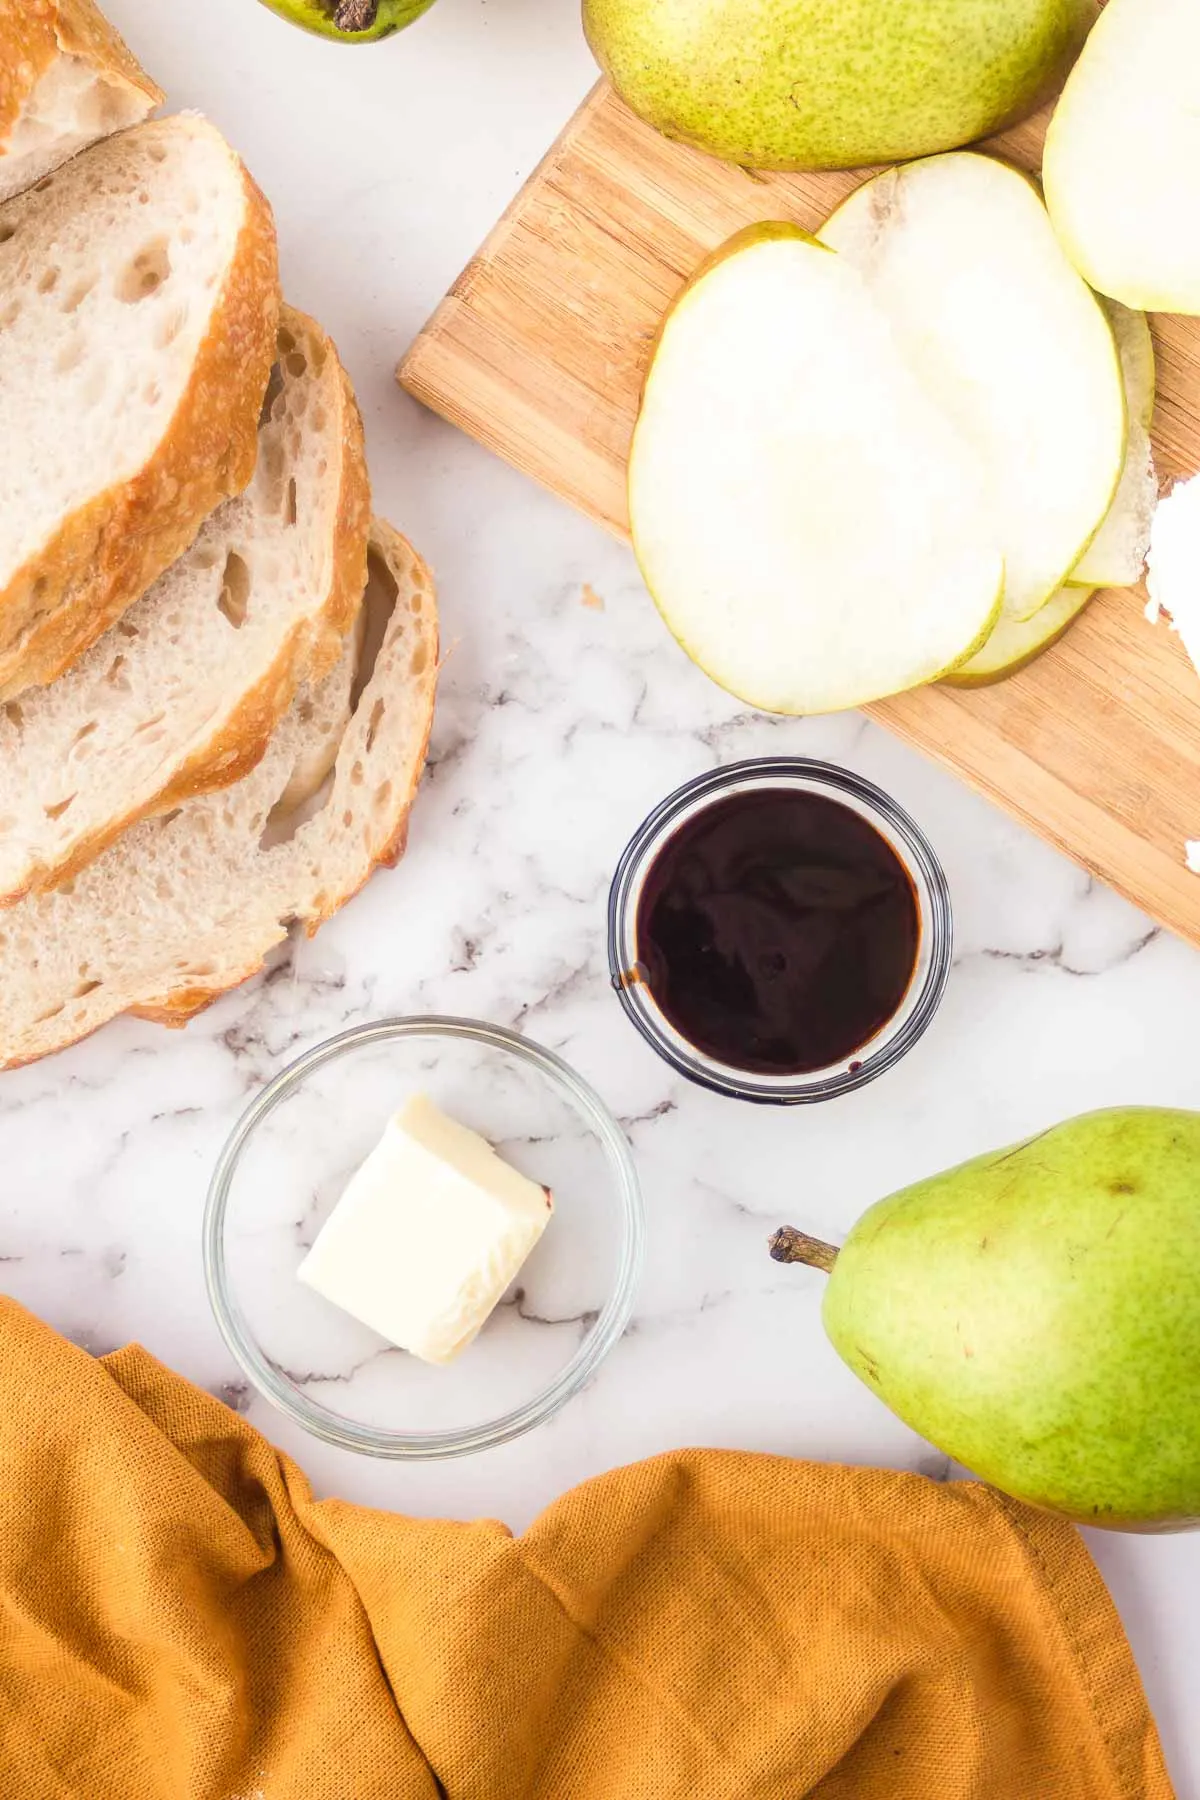 Ingredients to make a pear and goat cheese sandwich.